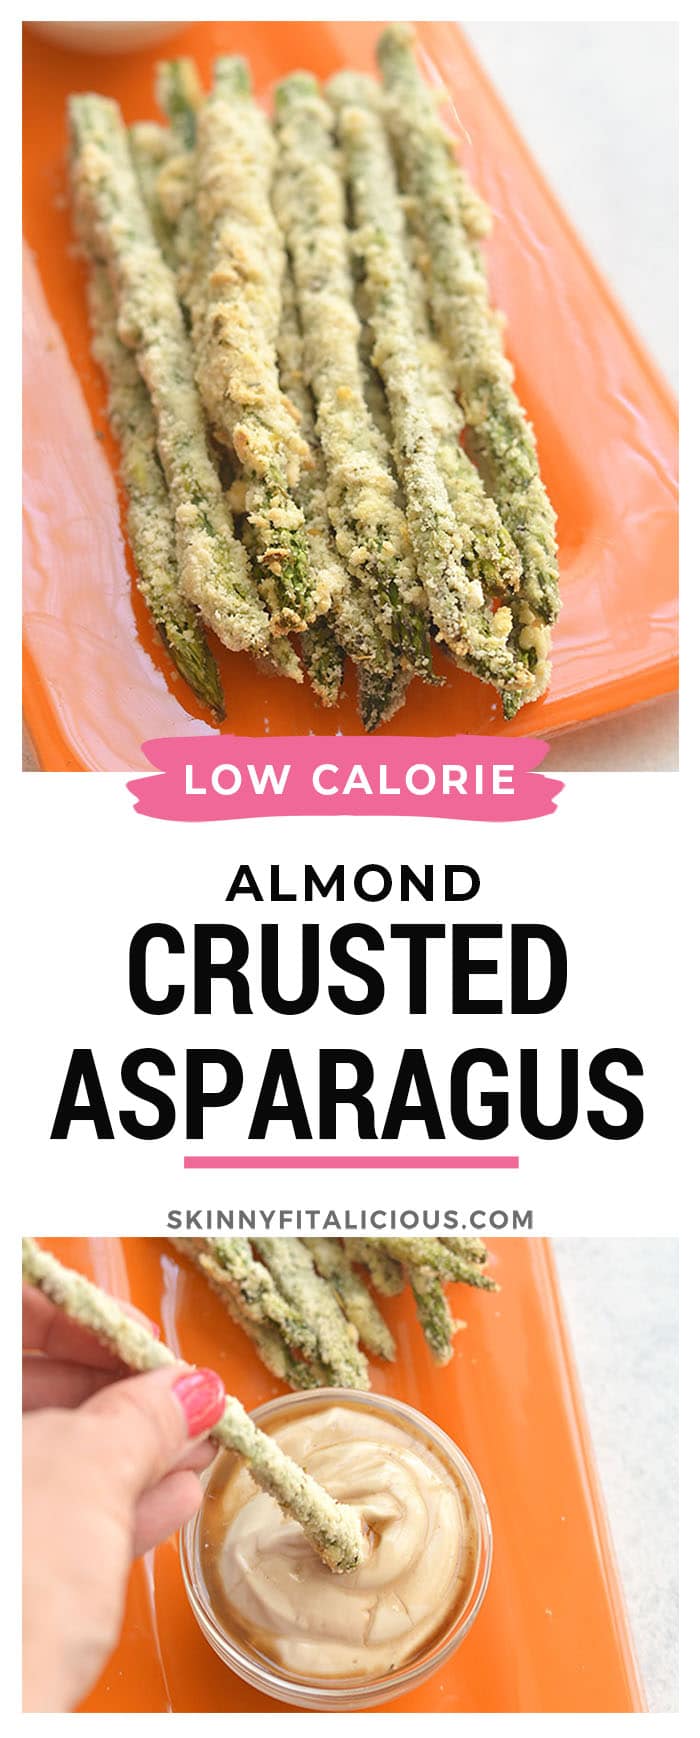 Almond Crusted Asparagus with Soy Yogurt is an easy way of flavoring boring veggies so you'll want to eat more of them. Paired with a simple Greek yogurt dipping sauce to dip your asparagus fries into for a simple and tasty side or appetizer.